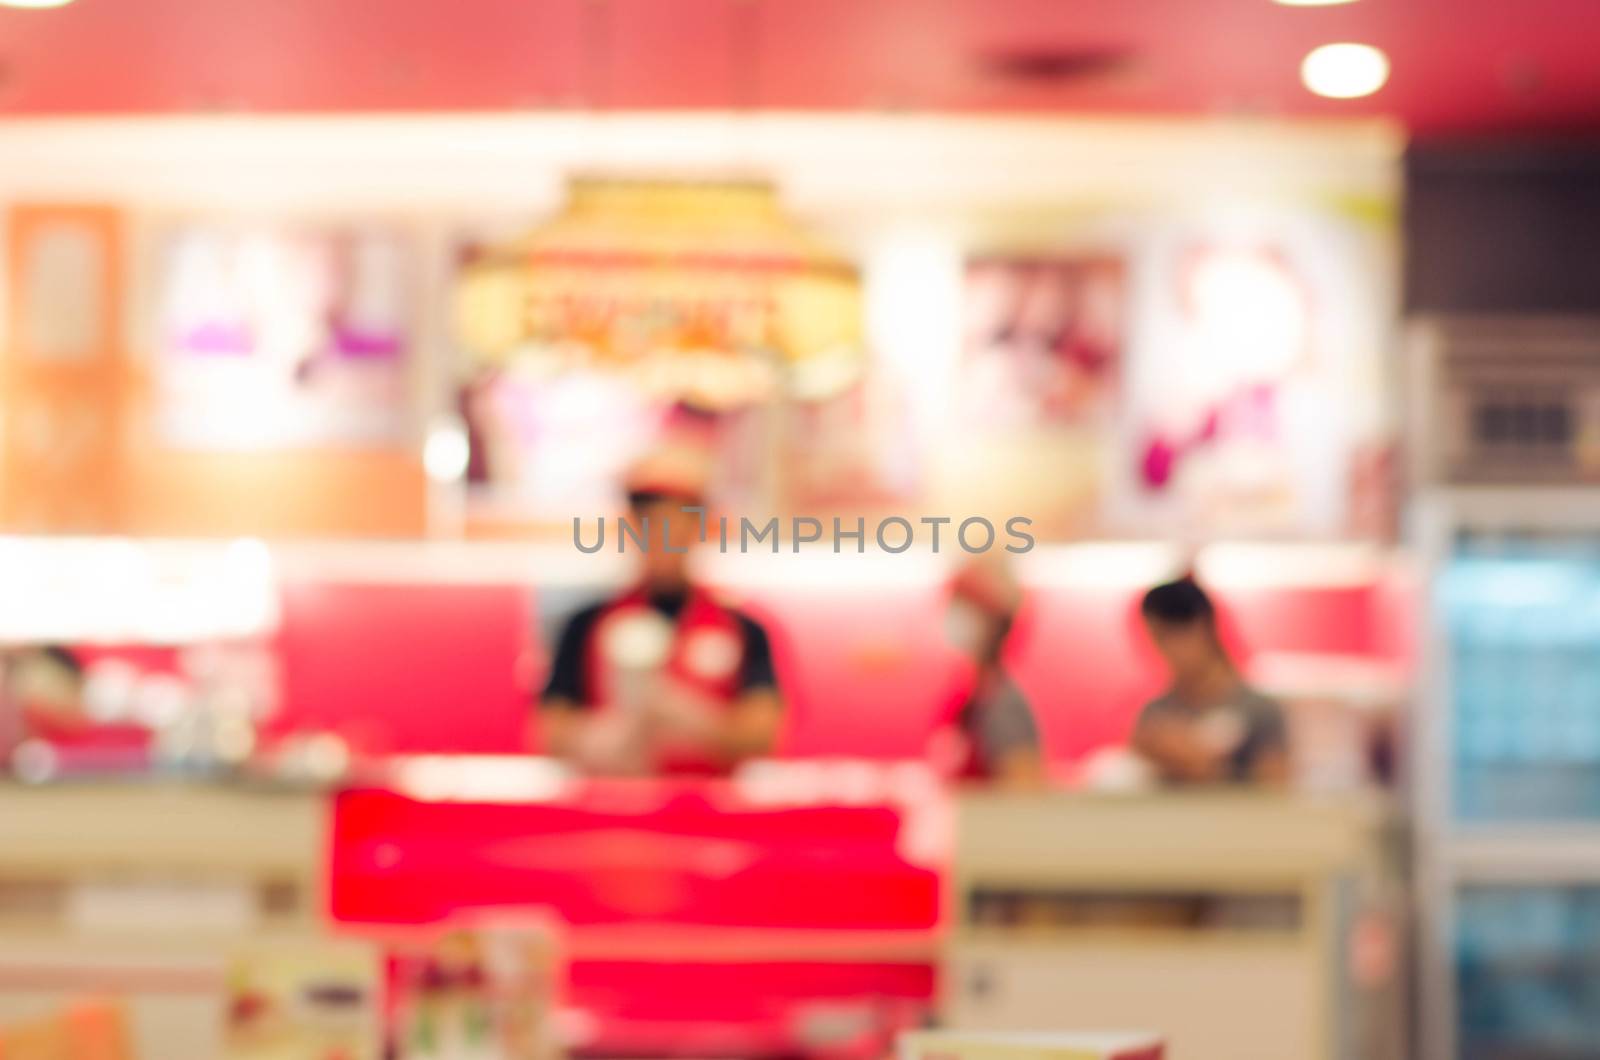 Blurred people in the restaurant. by photobyphotoboy